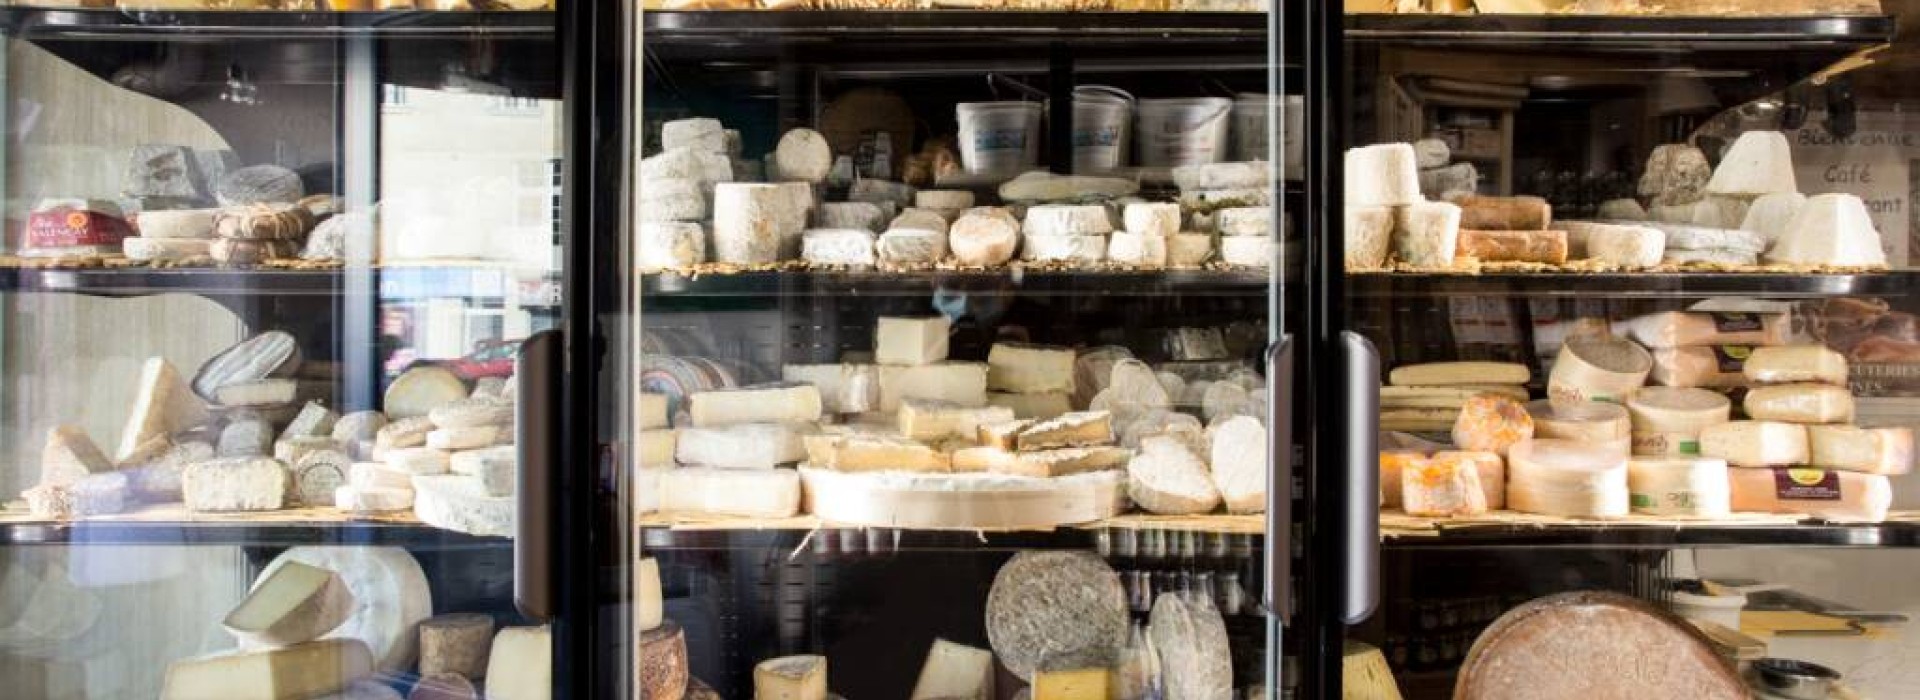 BAR A FROMAGES - FROMAGERIE ROUET